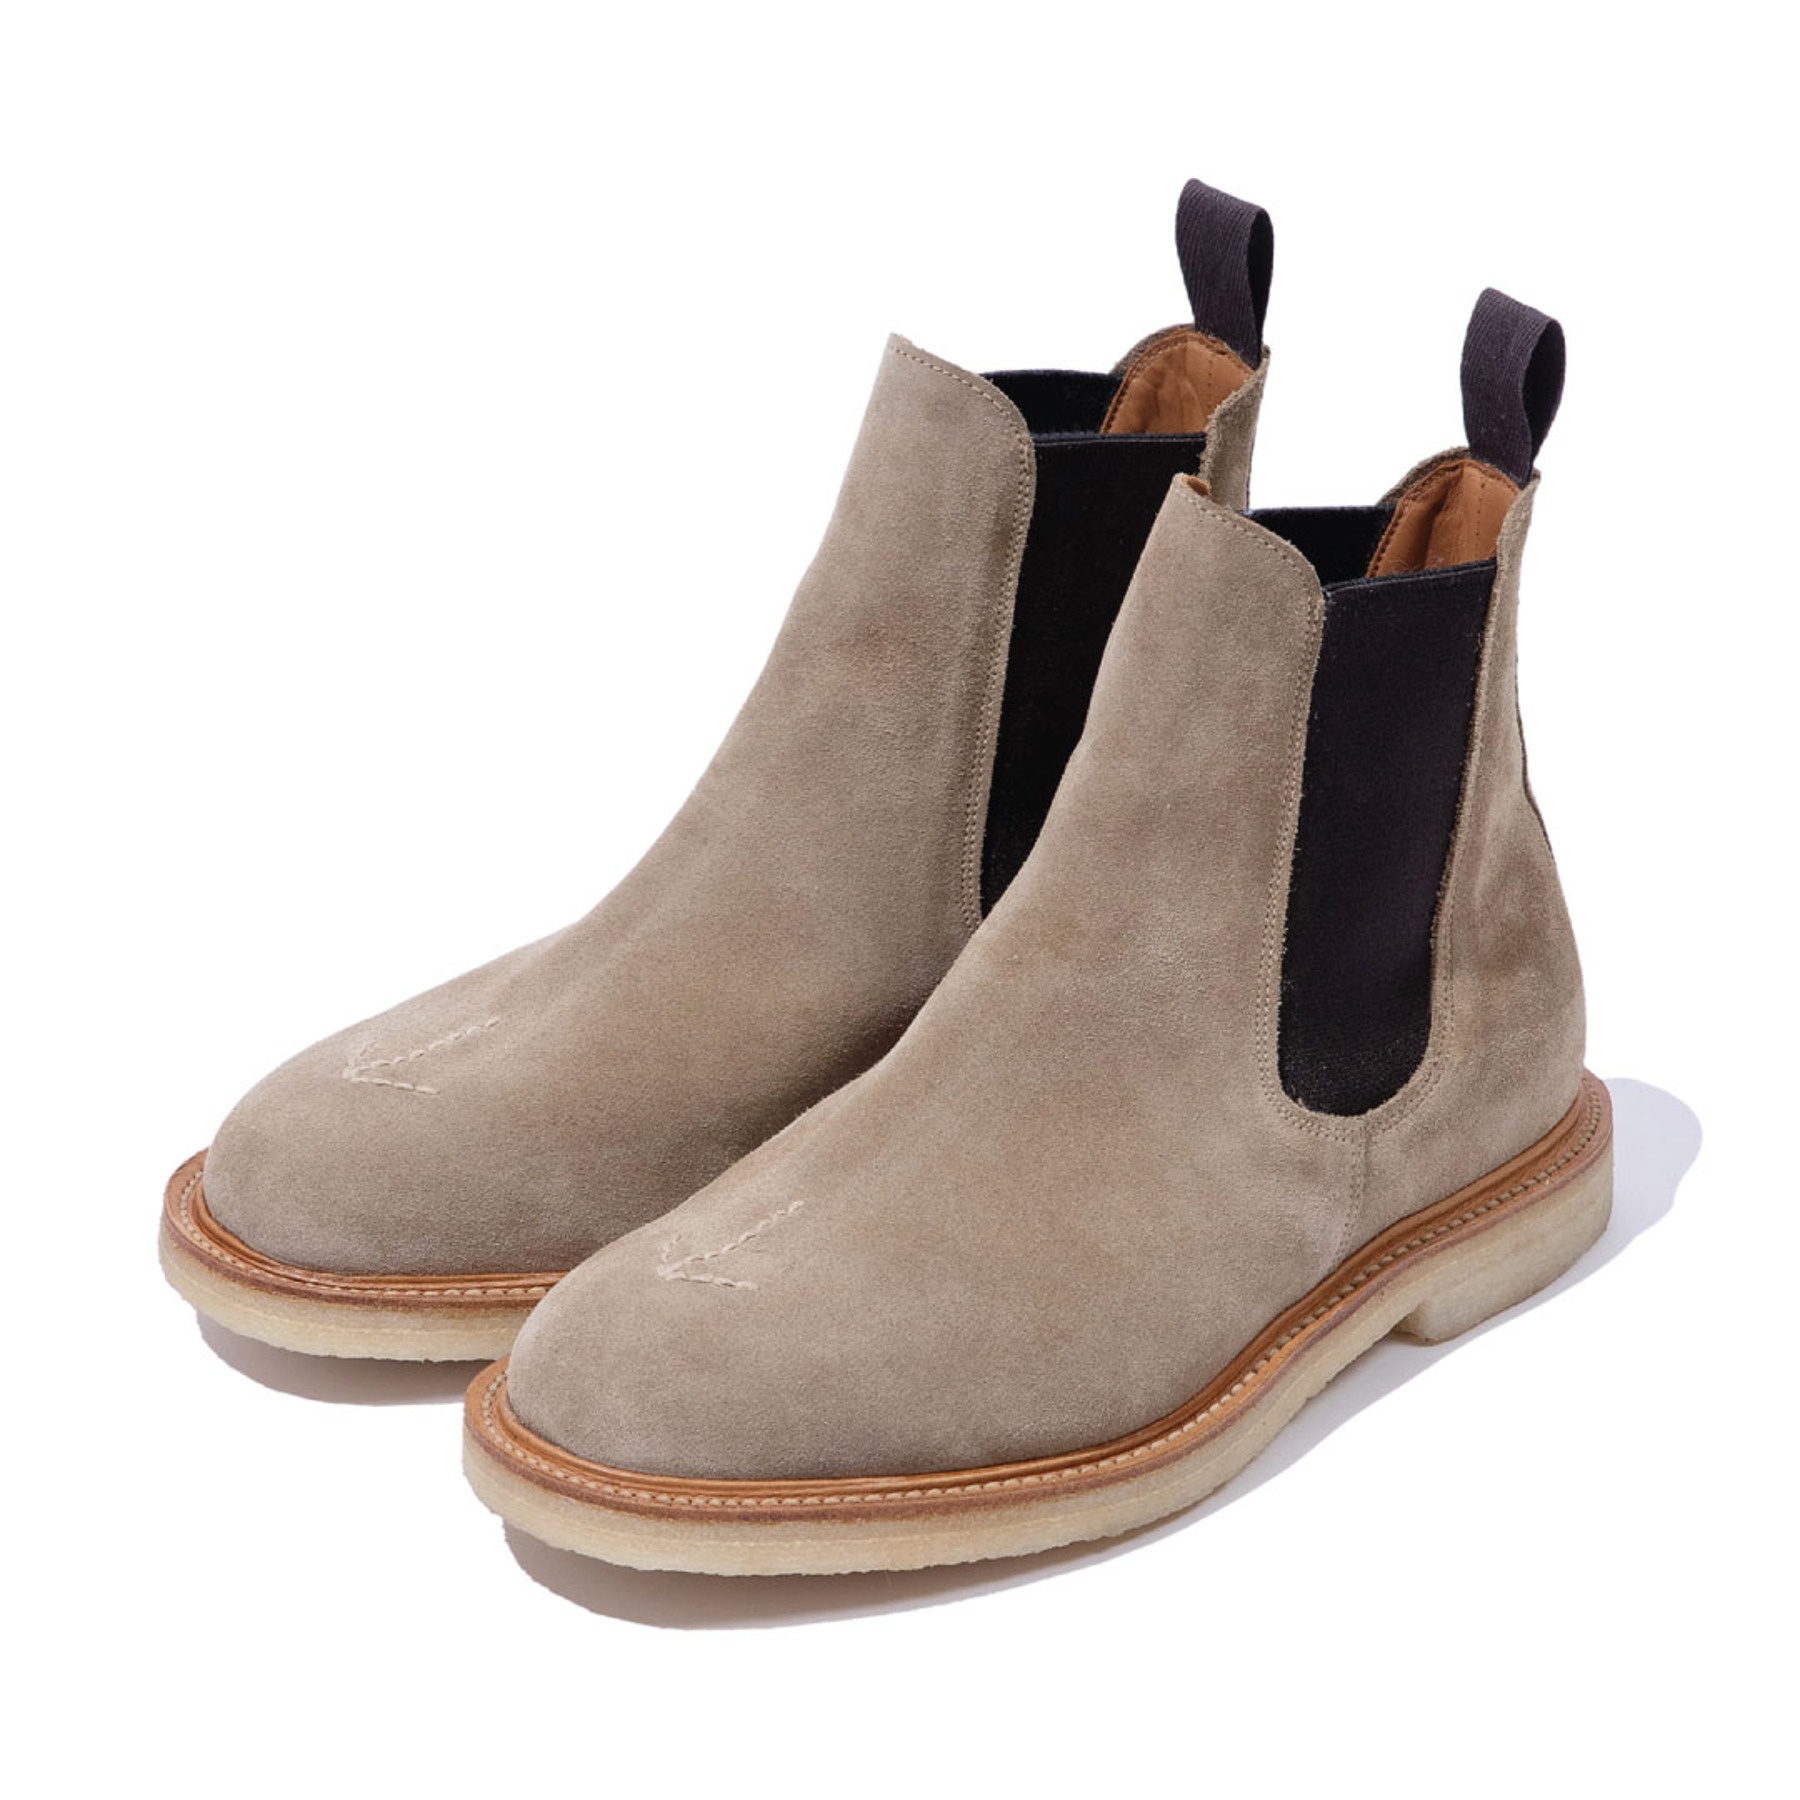 CHELSEA BOOTS - DIRTY BUCK SUEDE with IVORY ARROW